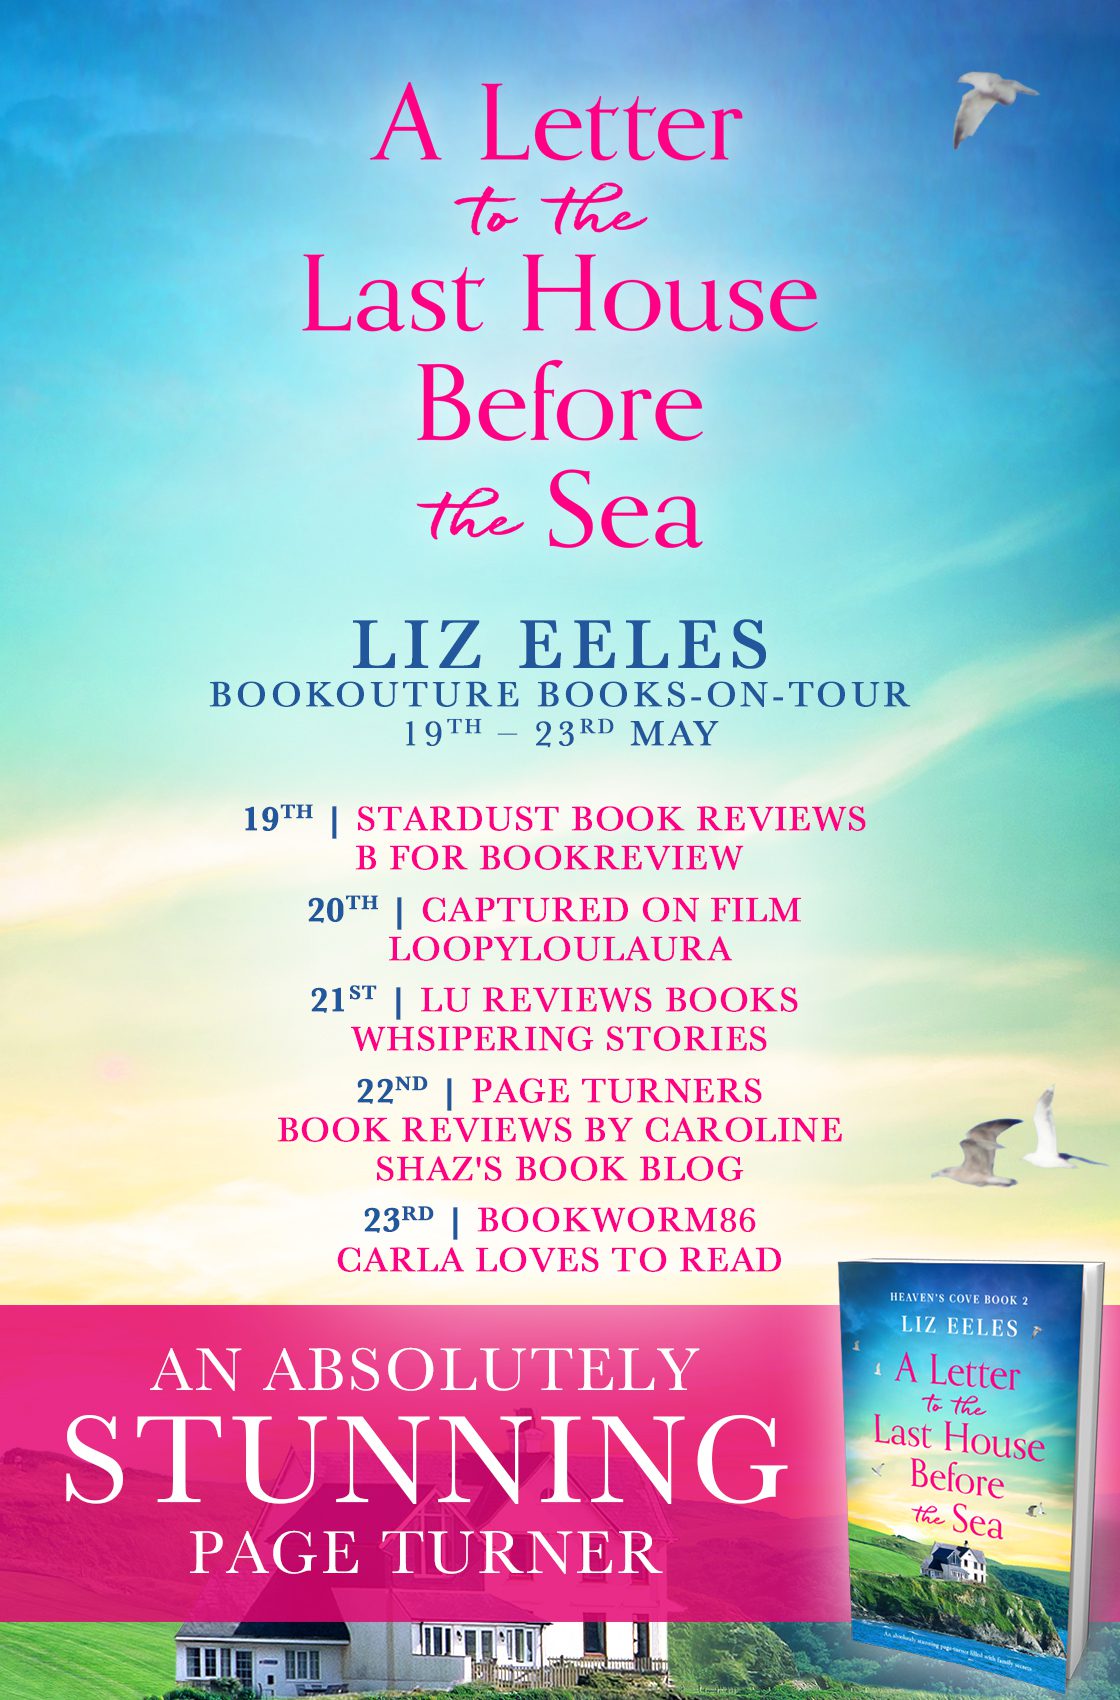 A Letter to the Last House Before the Sea blog tour banner